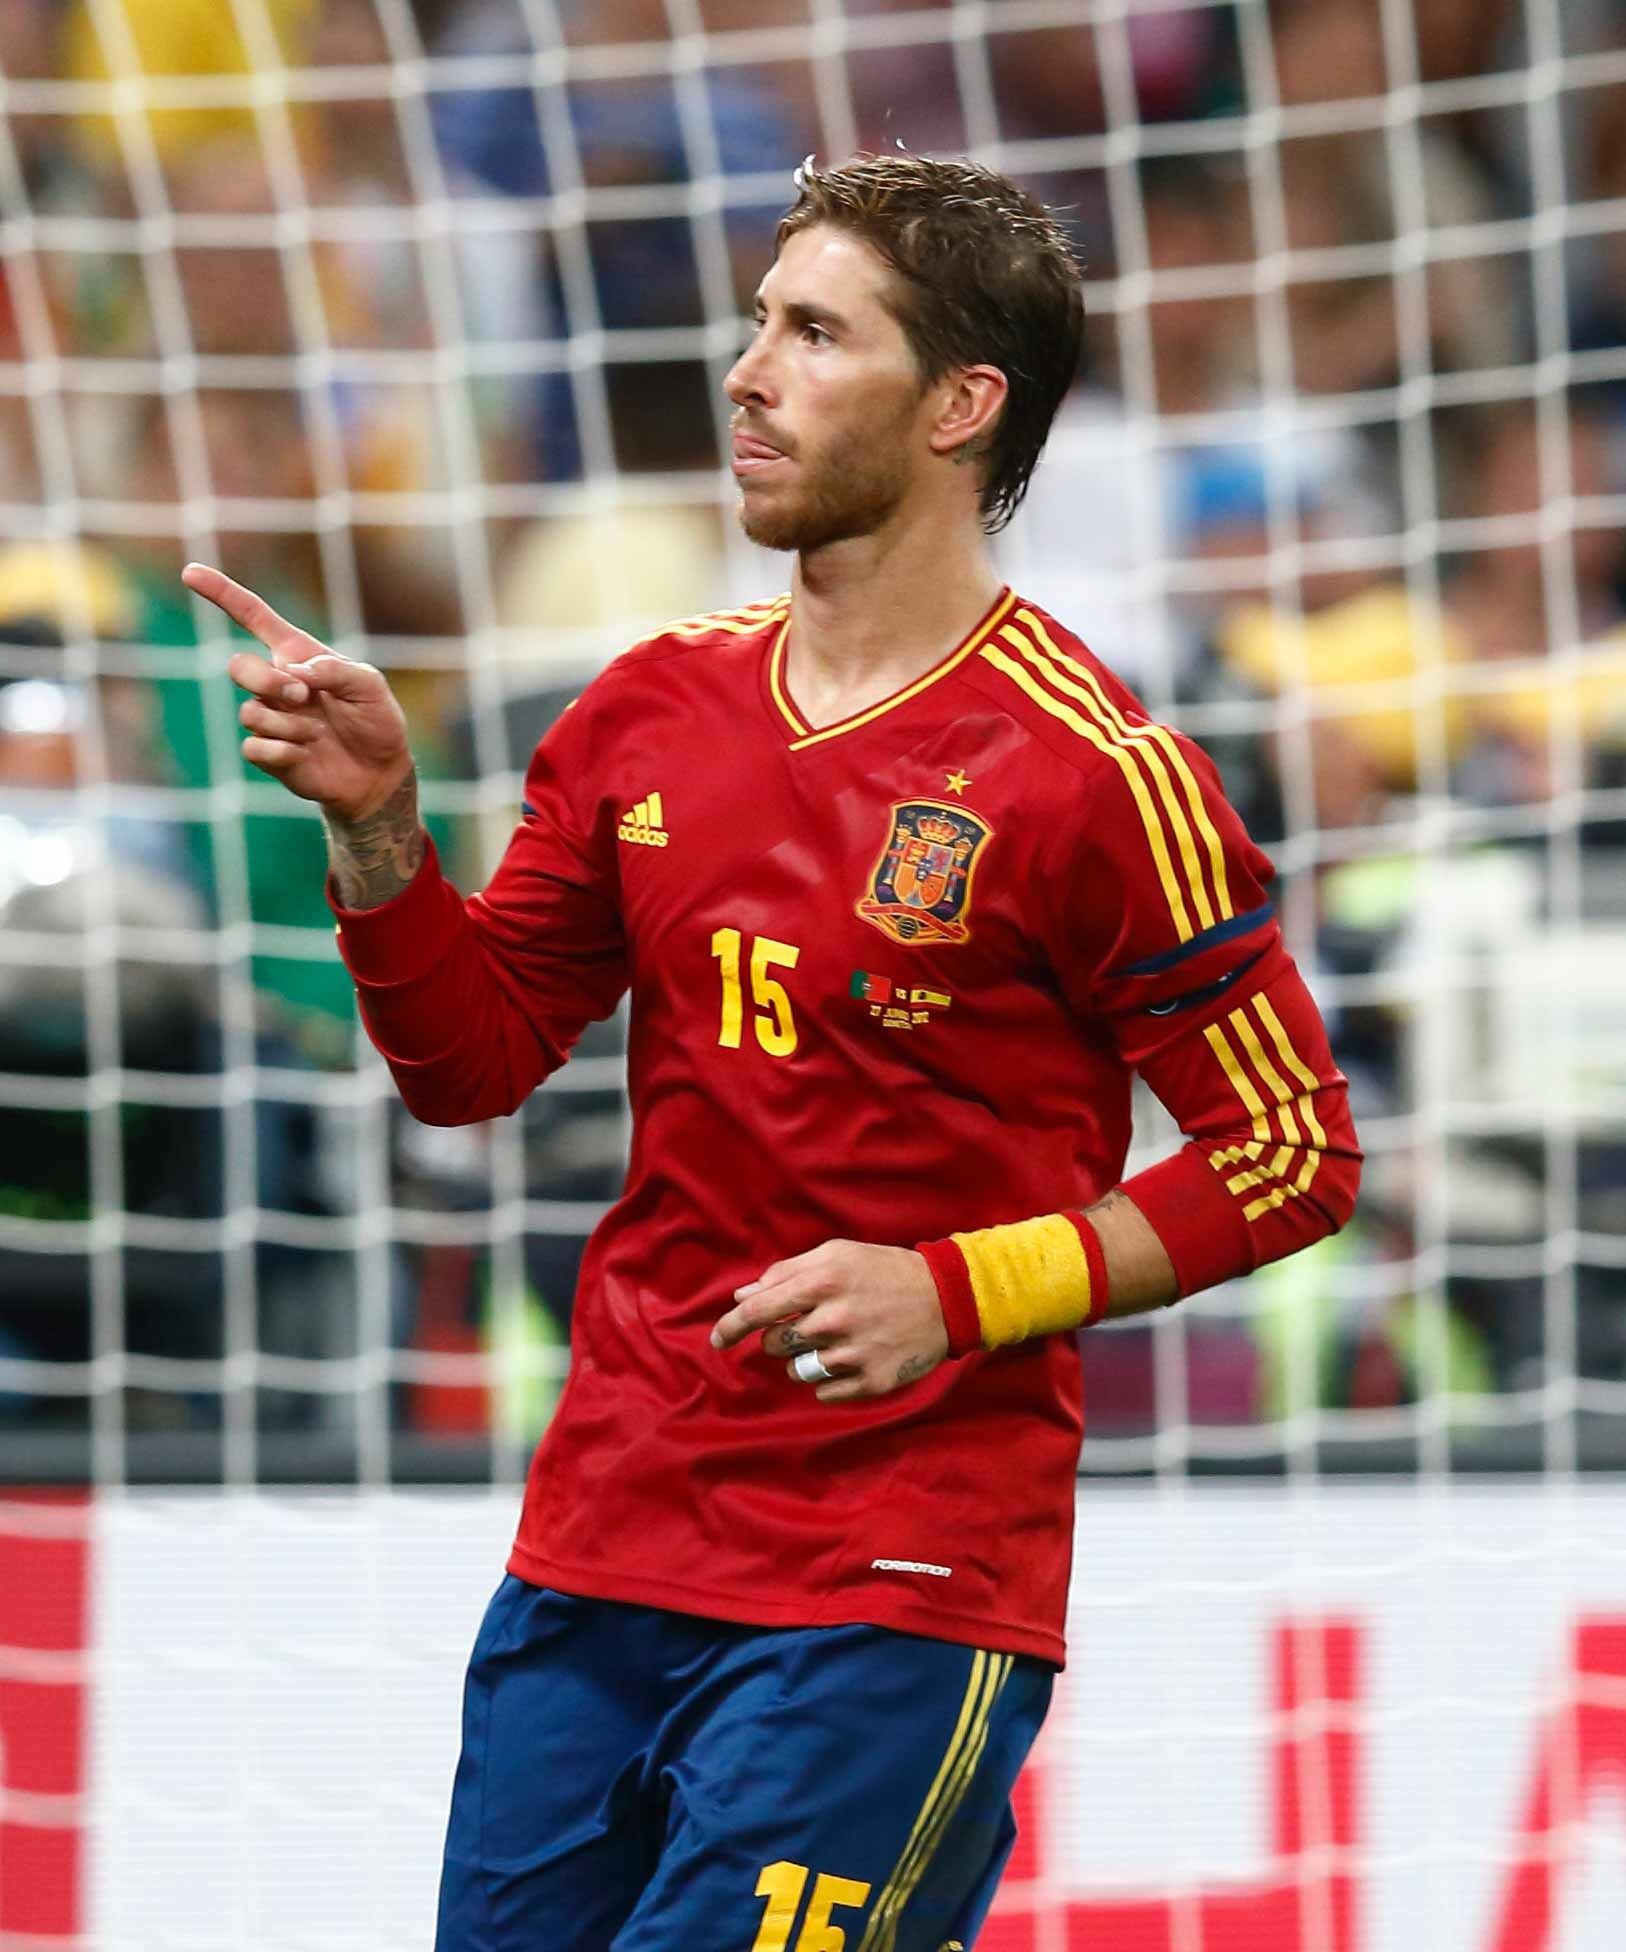 Sergio Ramos 2018 Wallpaper HD background picture